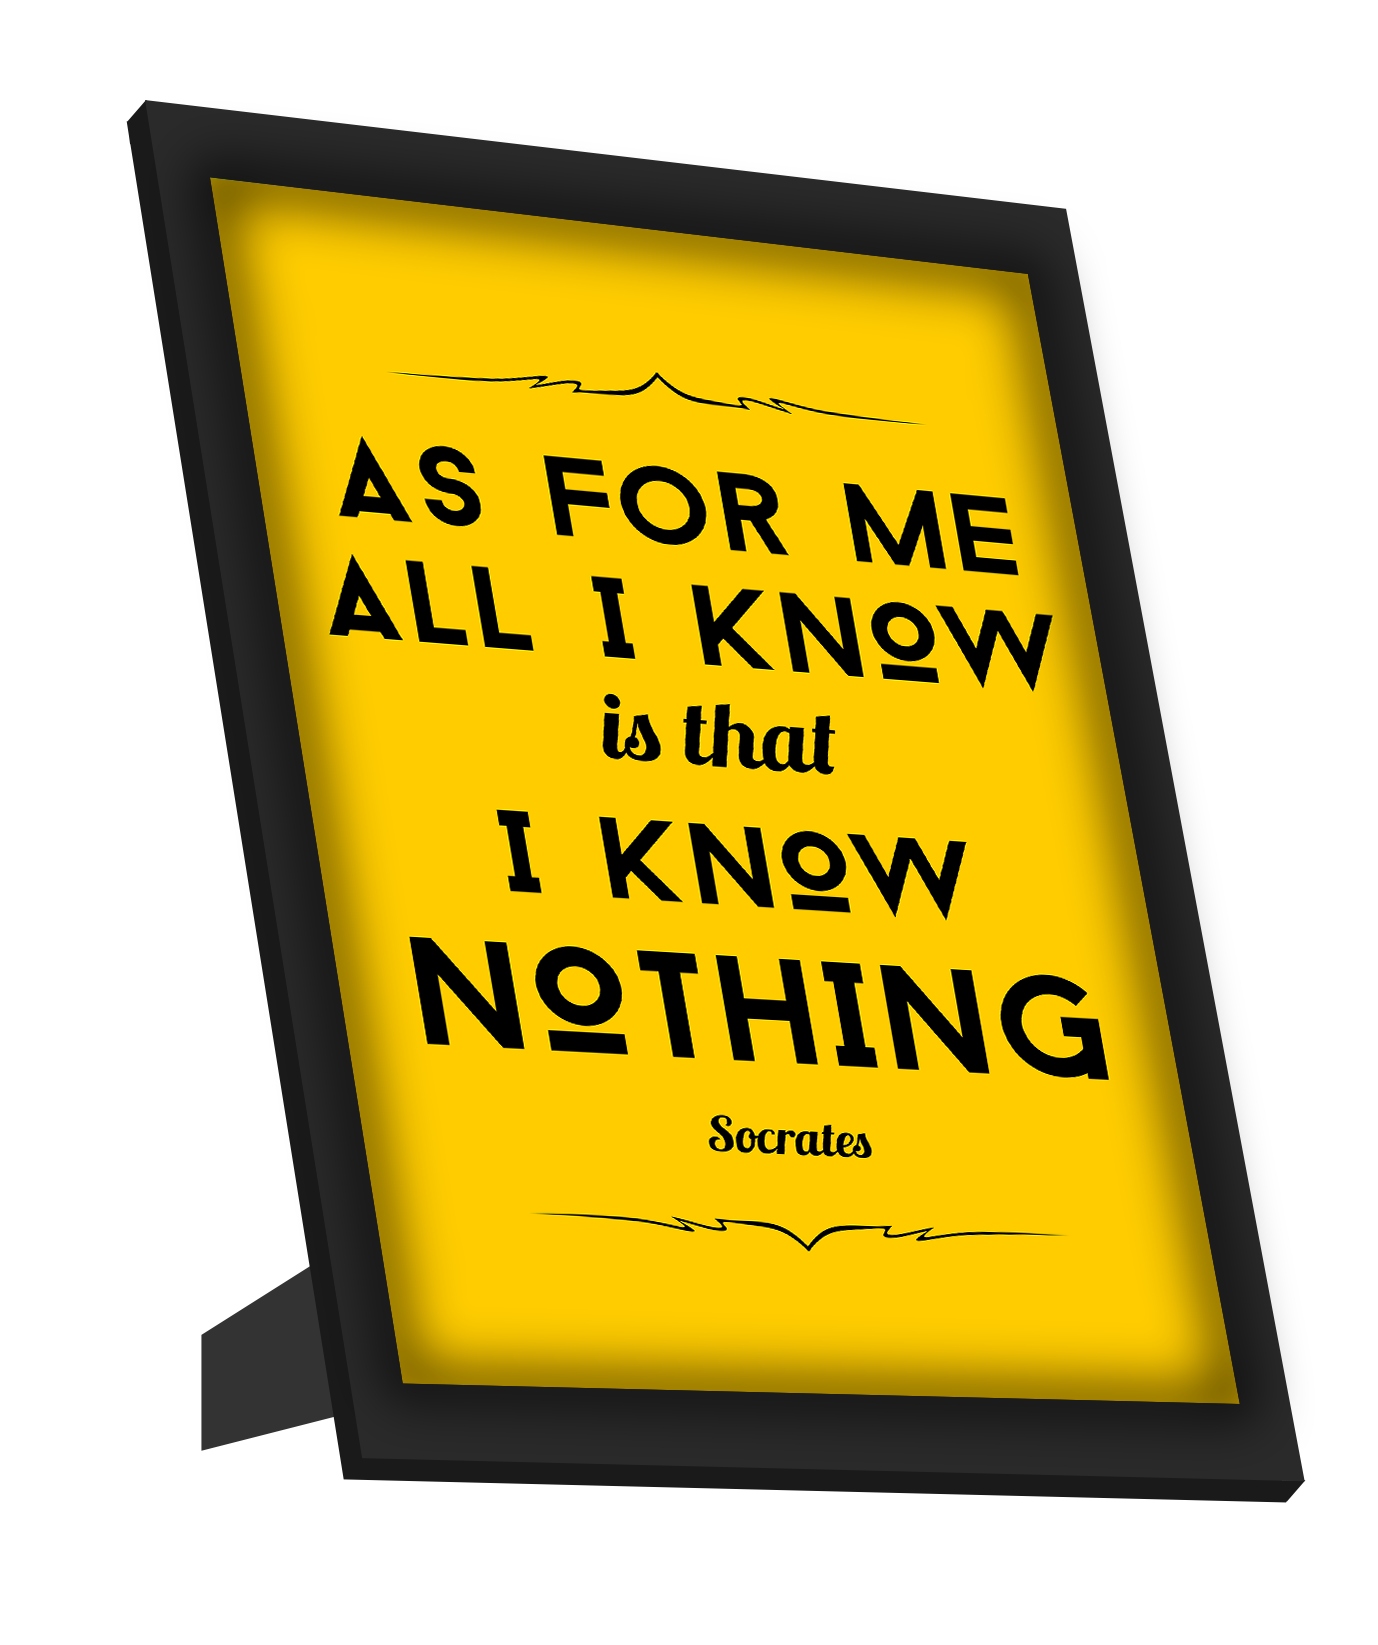 Framed Art, Know Nothing Socrates Quote Framed Art, - PosterGully